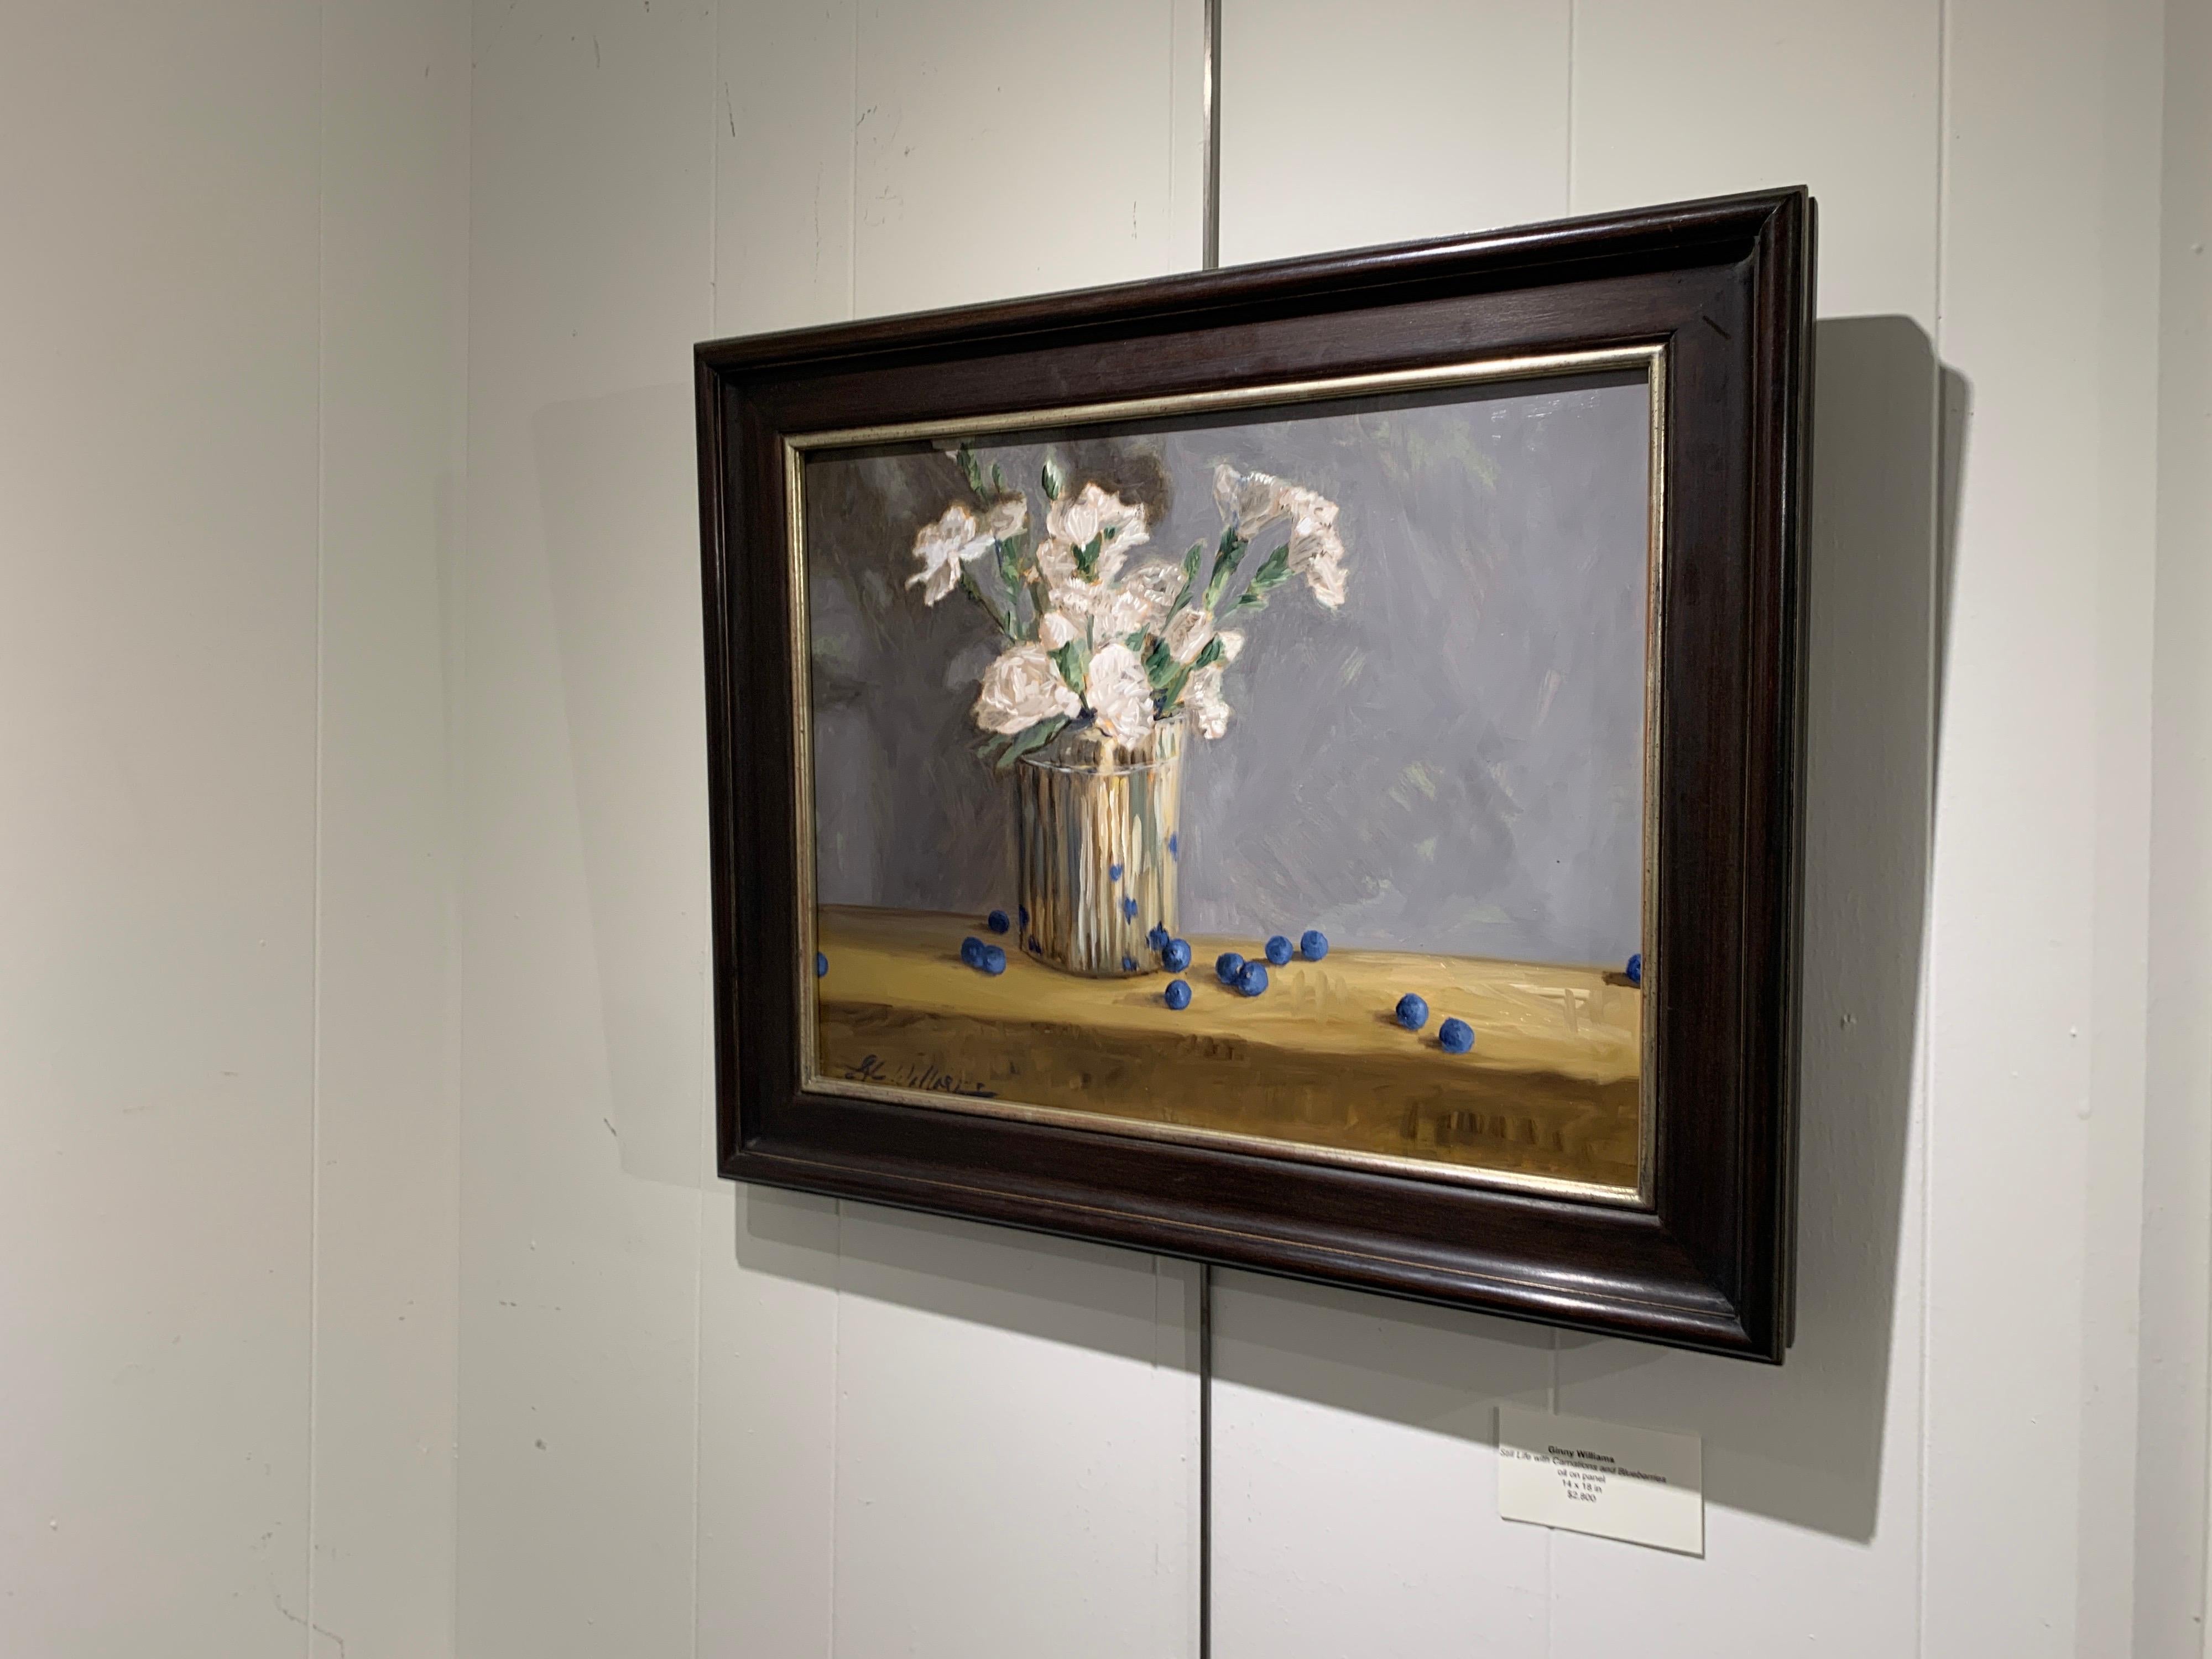 Set inside a gilt molded frame, this oil on linen still-life painting is signed lower right. Without its frame, it measures 14 x 18 inches.

We were immediately drawn to the thoughtfully painted work, the clever titles and the rich, deep hues. And